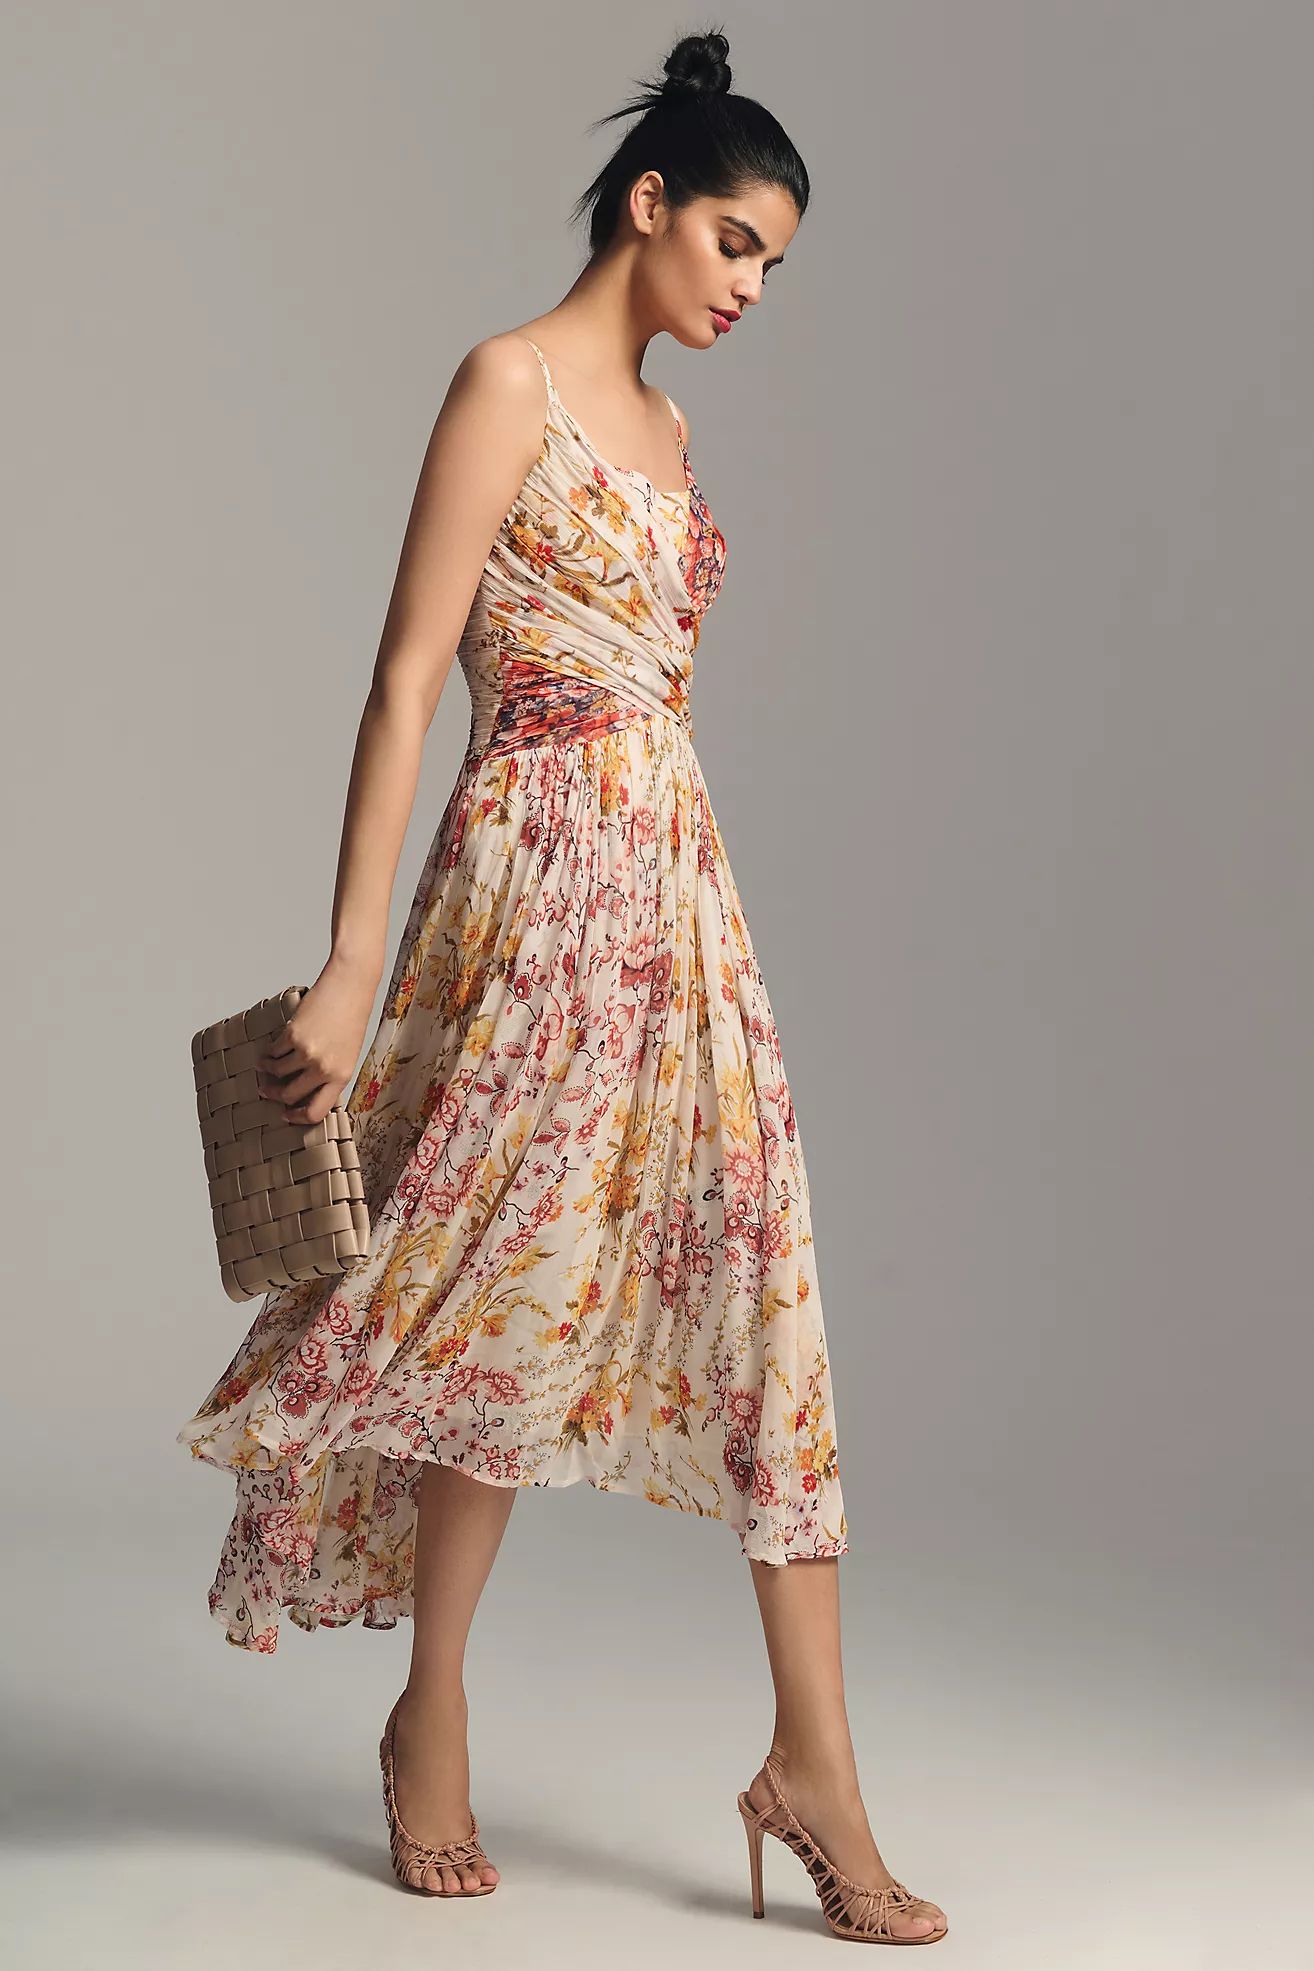 By Anthropologie Ruched Square-Neck Dress | Anthropologie (US)